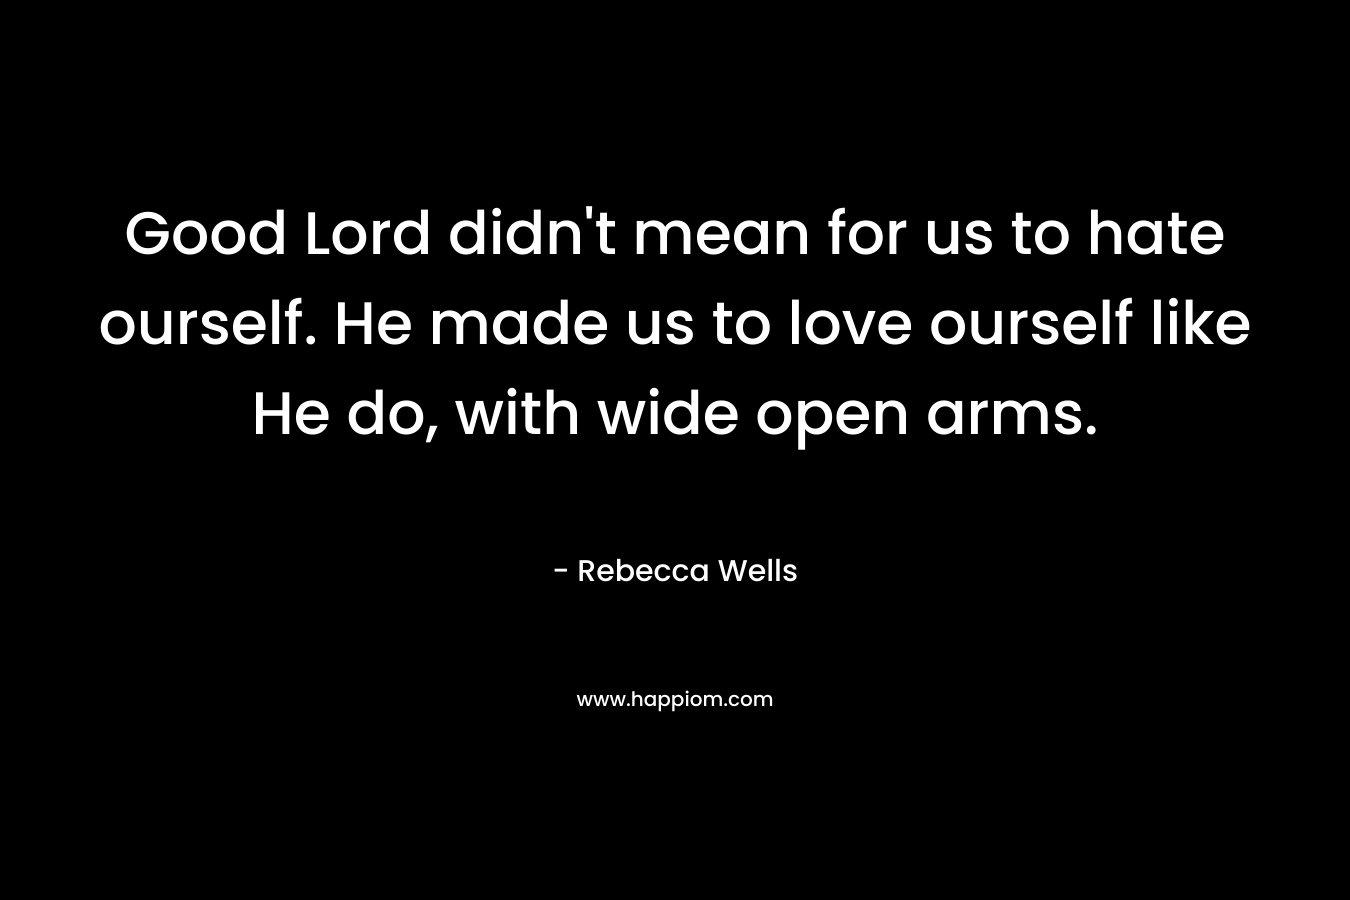 Good Lord didn’t mean for us to hate ourself. He made us to love ourself like He do, with wide open arms. – Rebecca Wells